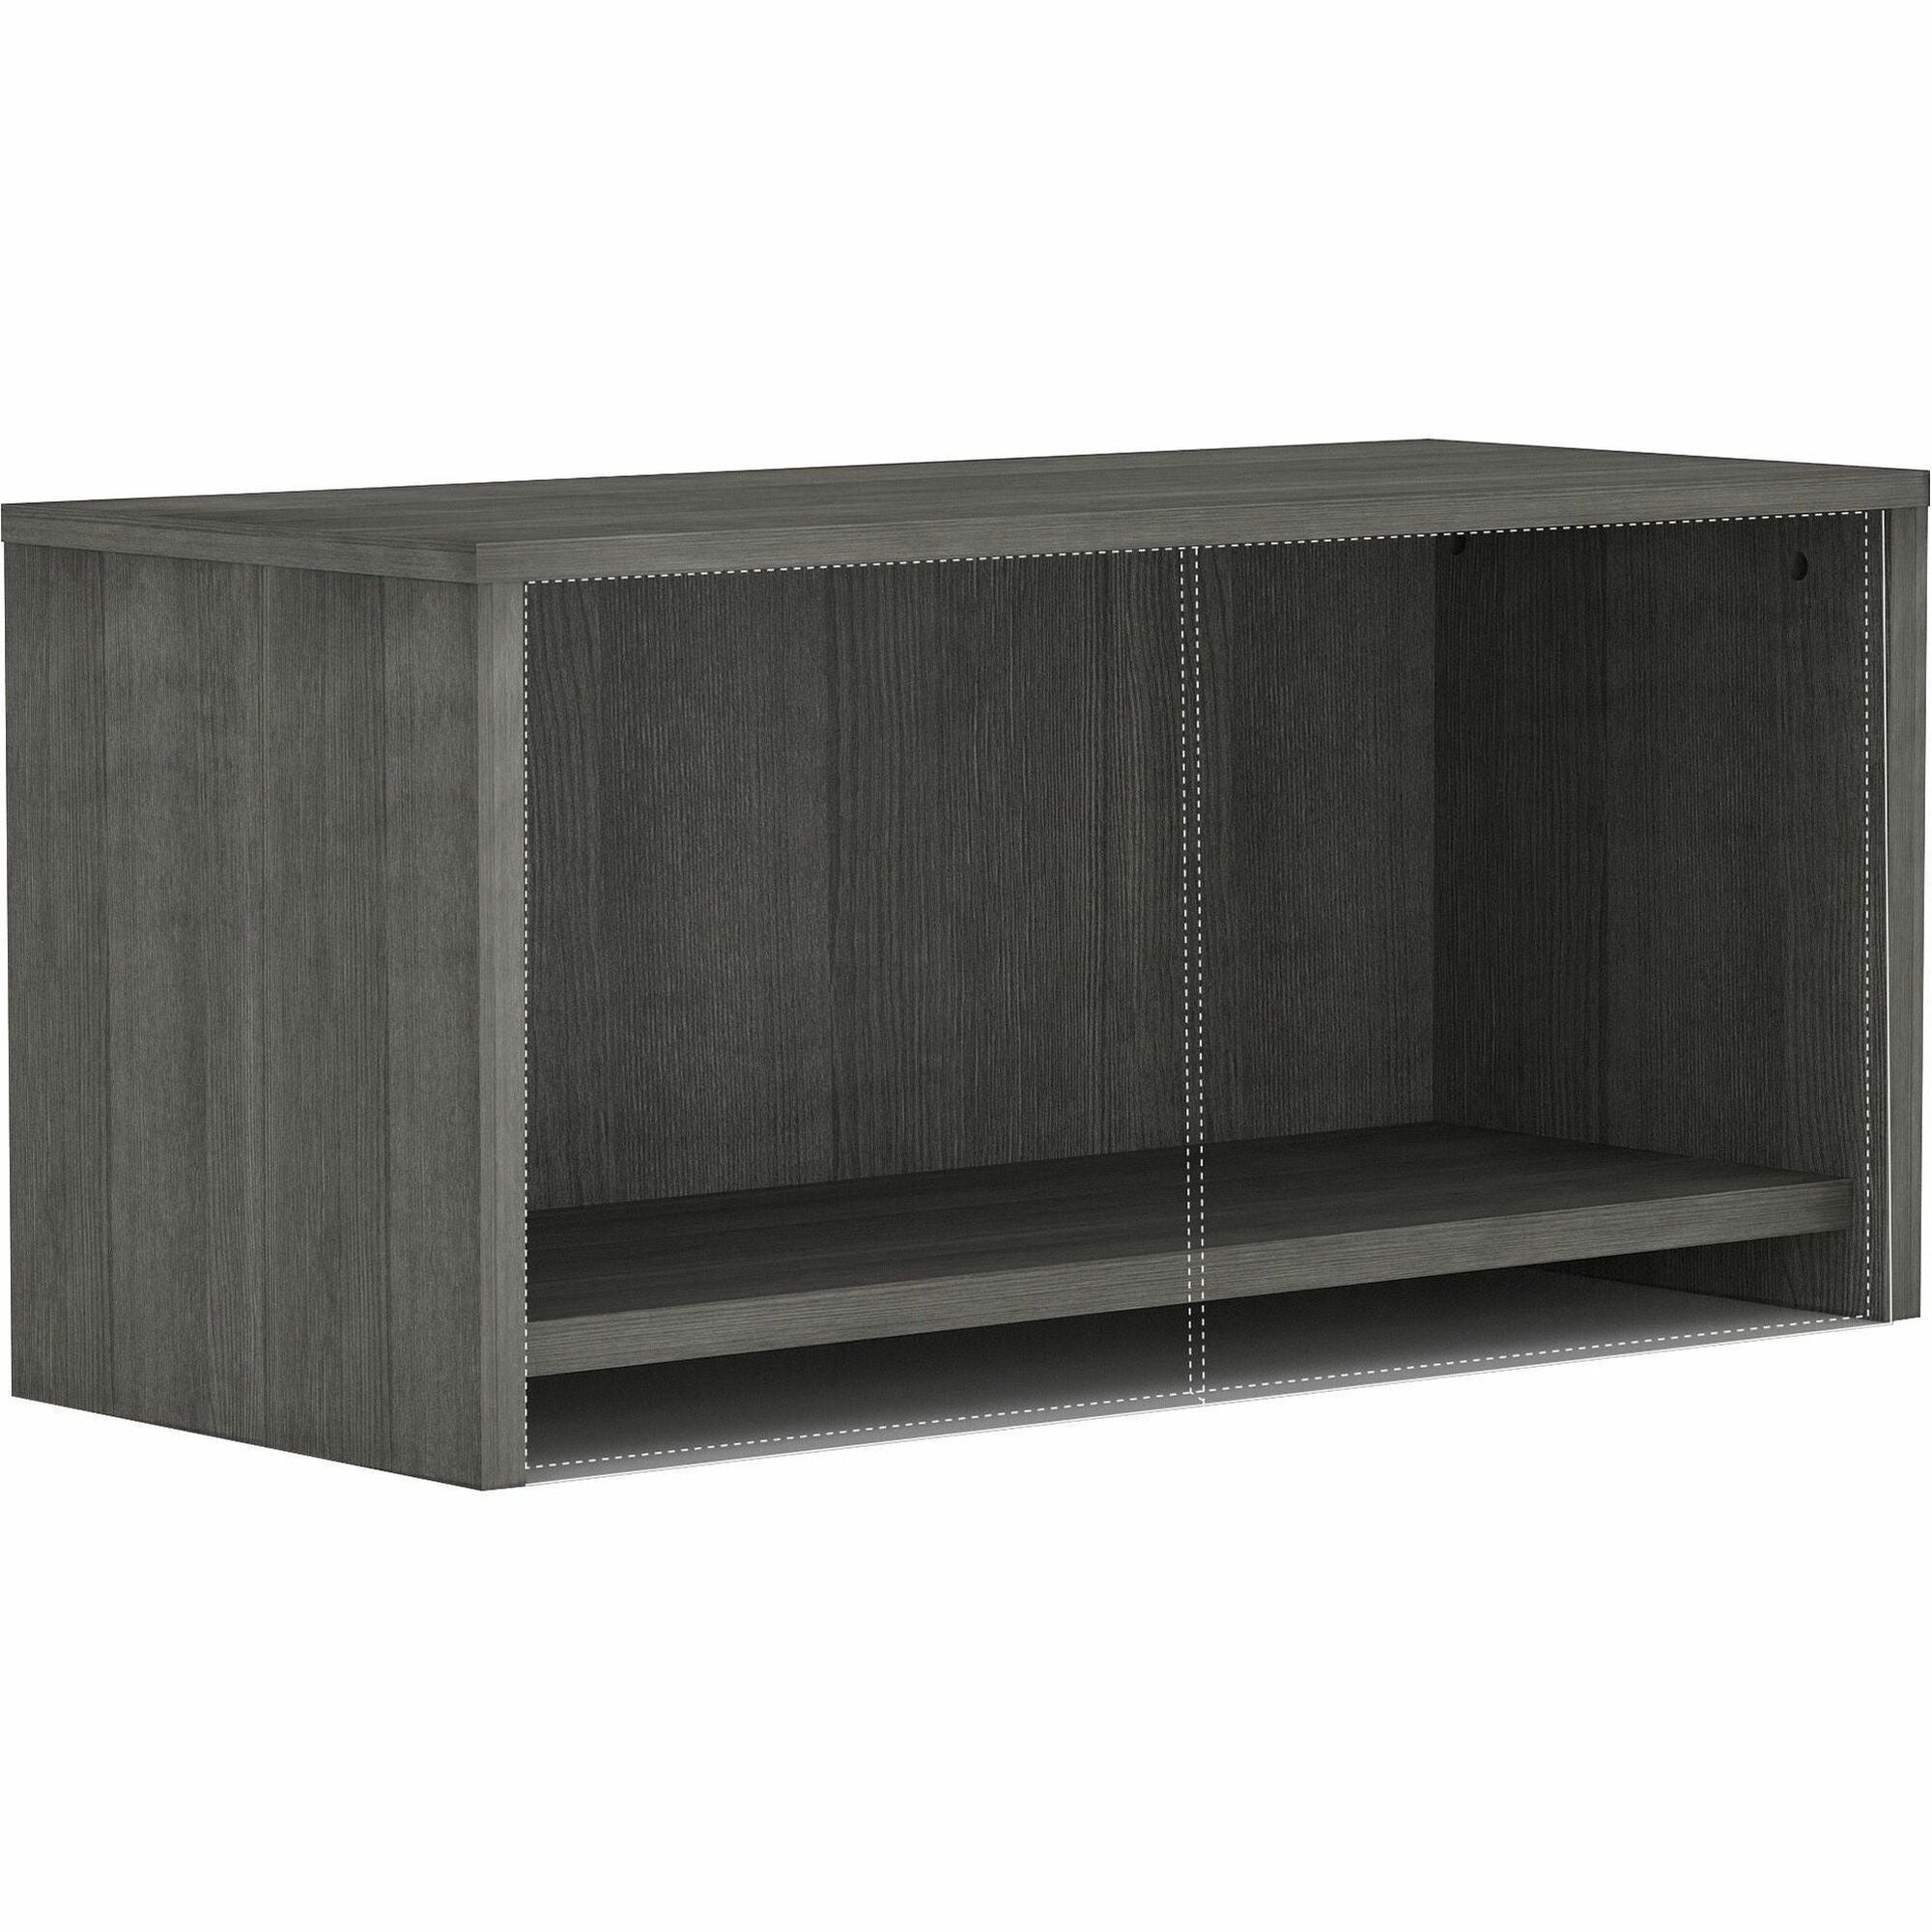 lorell-essentials-revelance-series-wall-mount-hutch-36-x-1517-hutch-1-side-panel-06-back-panel-1-bottom-panel-07-top-band-edge-finish-weathered-charcoal_llr16241 - 1